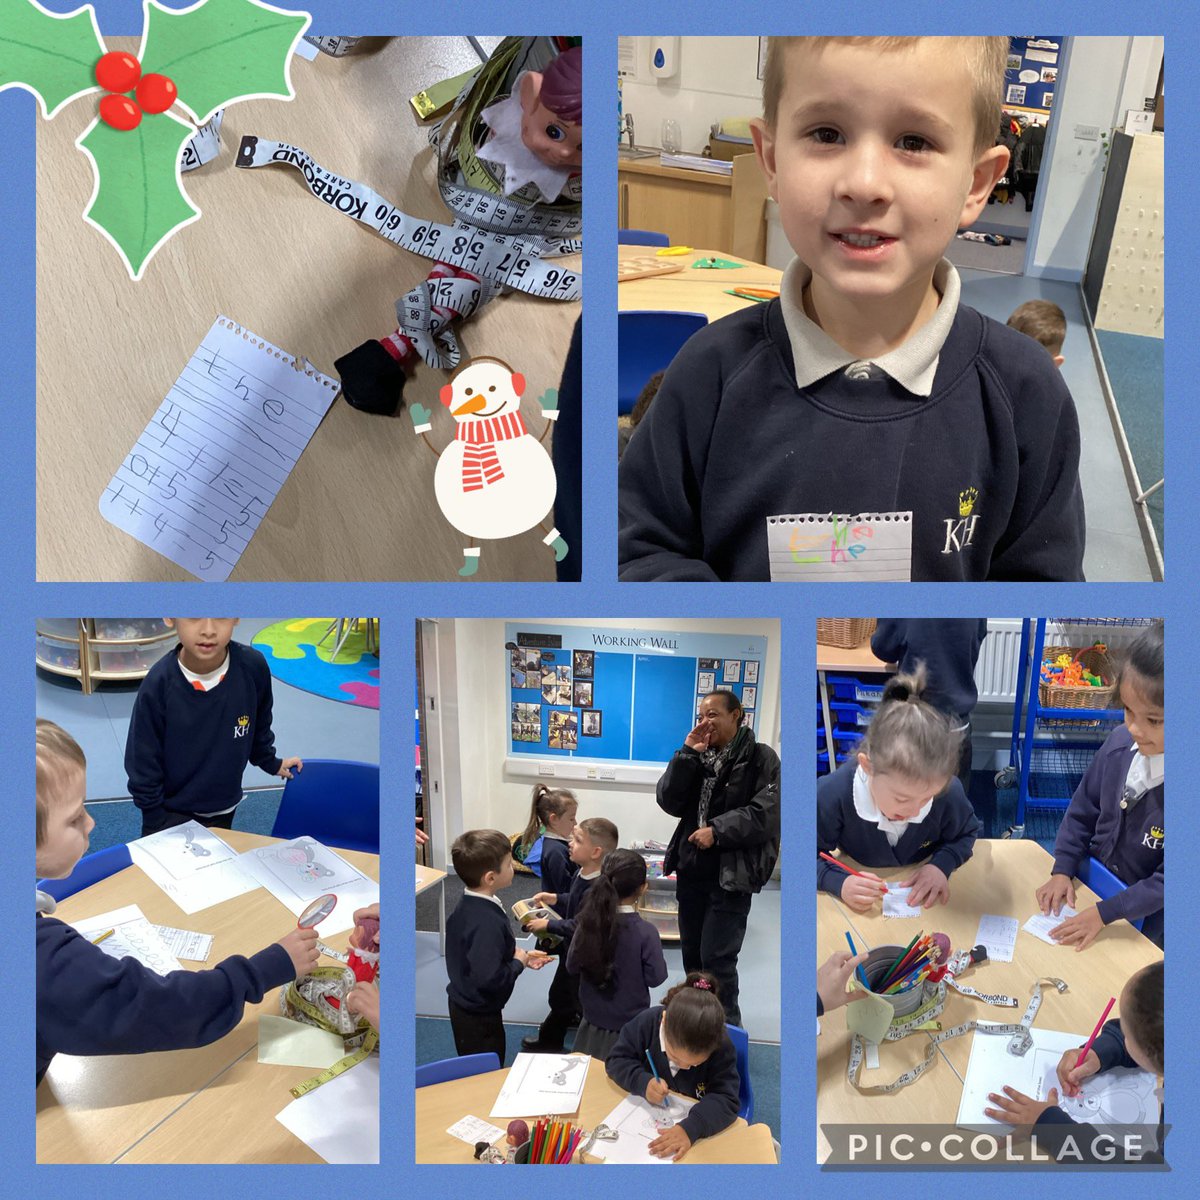 They were buzzing this morning. The Greep has tied up our elf, Tinsel, so the children have been very busy writing red word codes and number bonds to 5 to try and set him free! @KingsHeathPri @khpa_o @GregBottrill @khpa_d @d_khpa